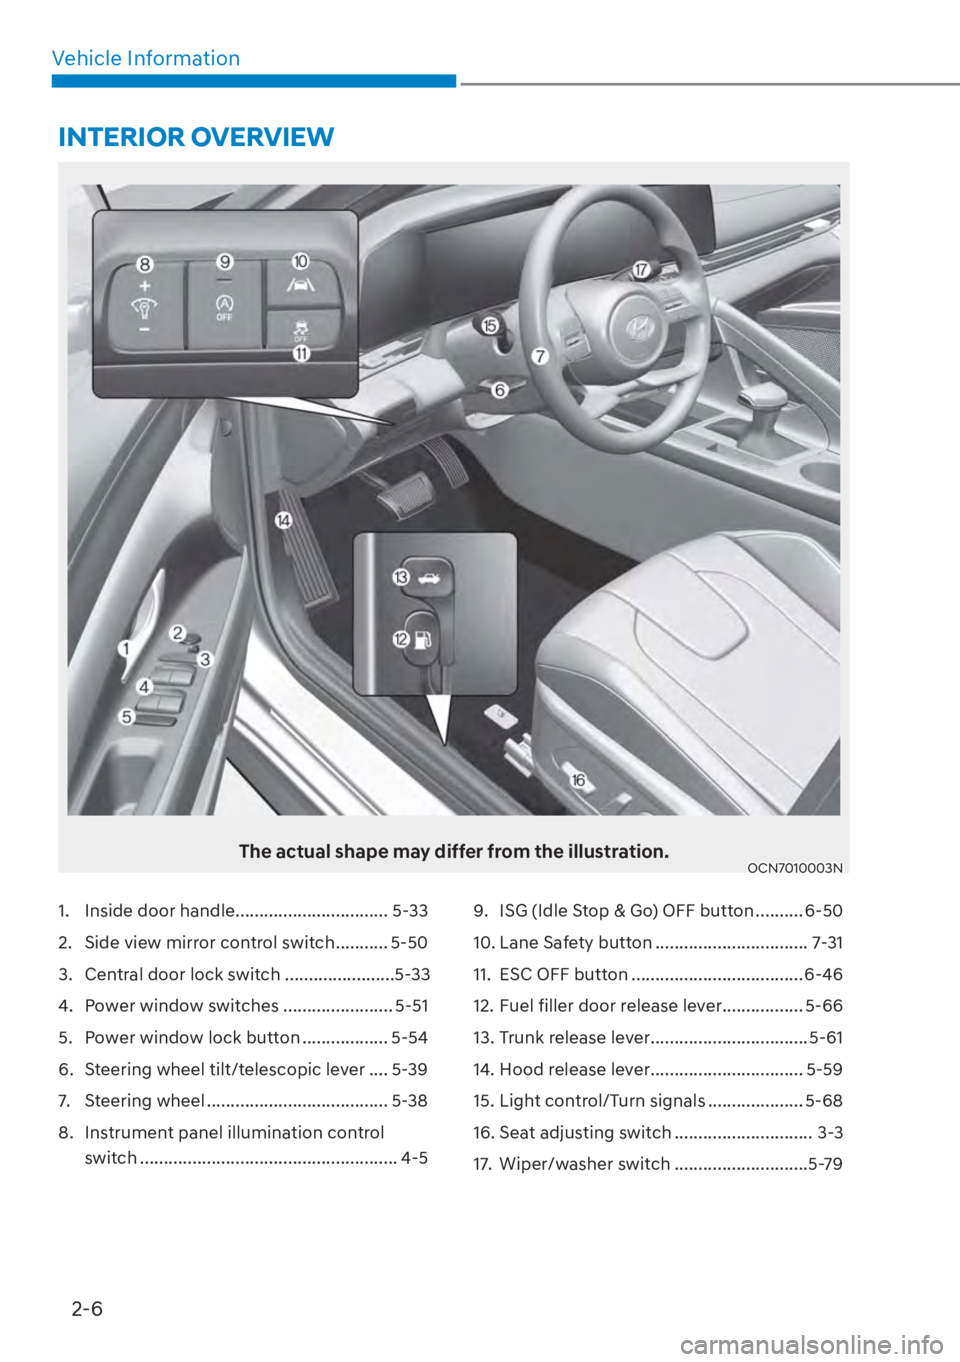 HYUNDAI ELANTRA 2023 User Guide 2-6
Vehicle Information
The actual shape may differ from the illustration.OCN7010003N
1.  Inside door handle ................................ 5-33
2.  Side view mirror control switch ........... 5-50
